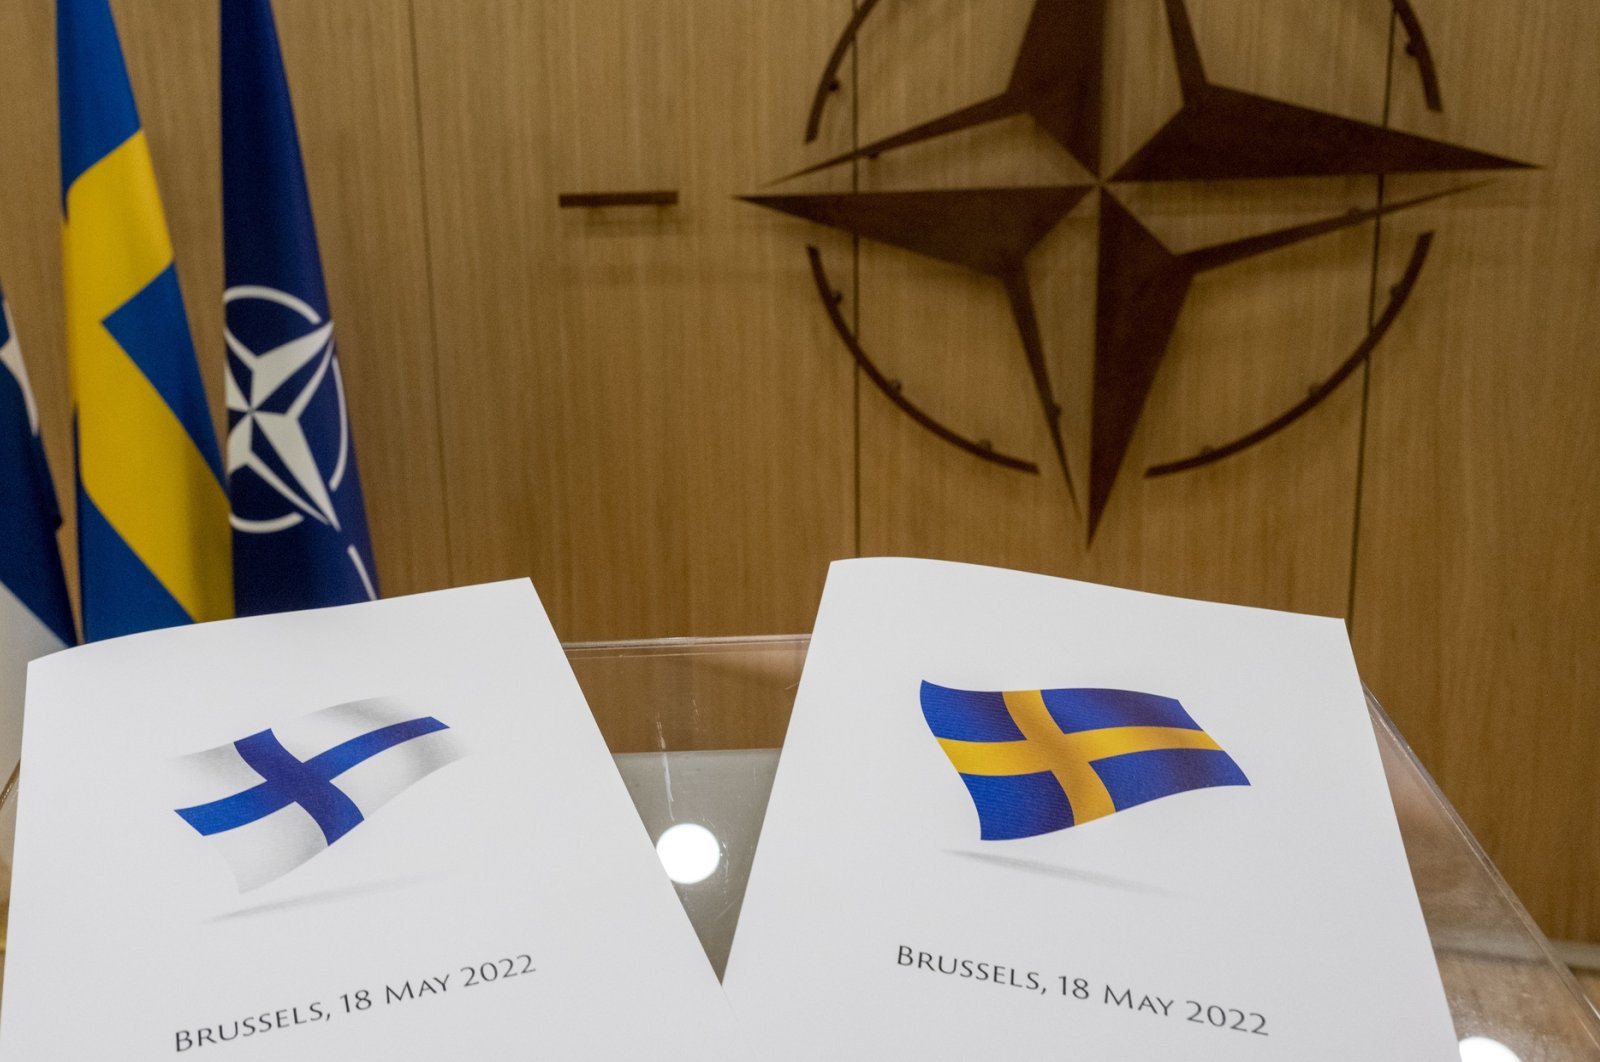 Finland and Sweden&#039;s official letters for NATO membership are seen prior to NATO Secretary-General Jens Stoltenberg&#039;s press meeting, in Brussels, Belgium, May 18, 2022. (AA Photo)